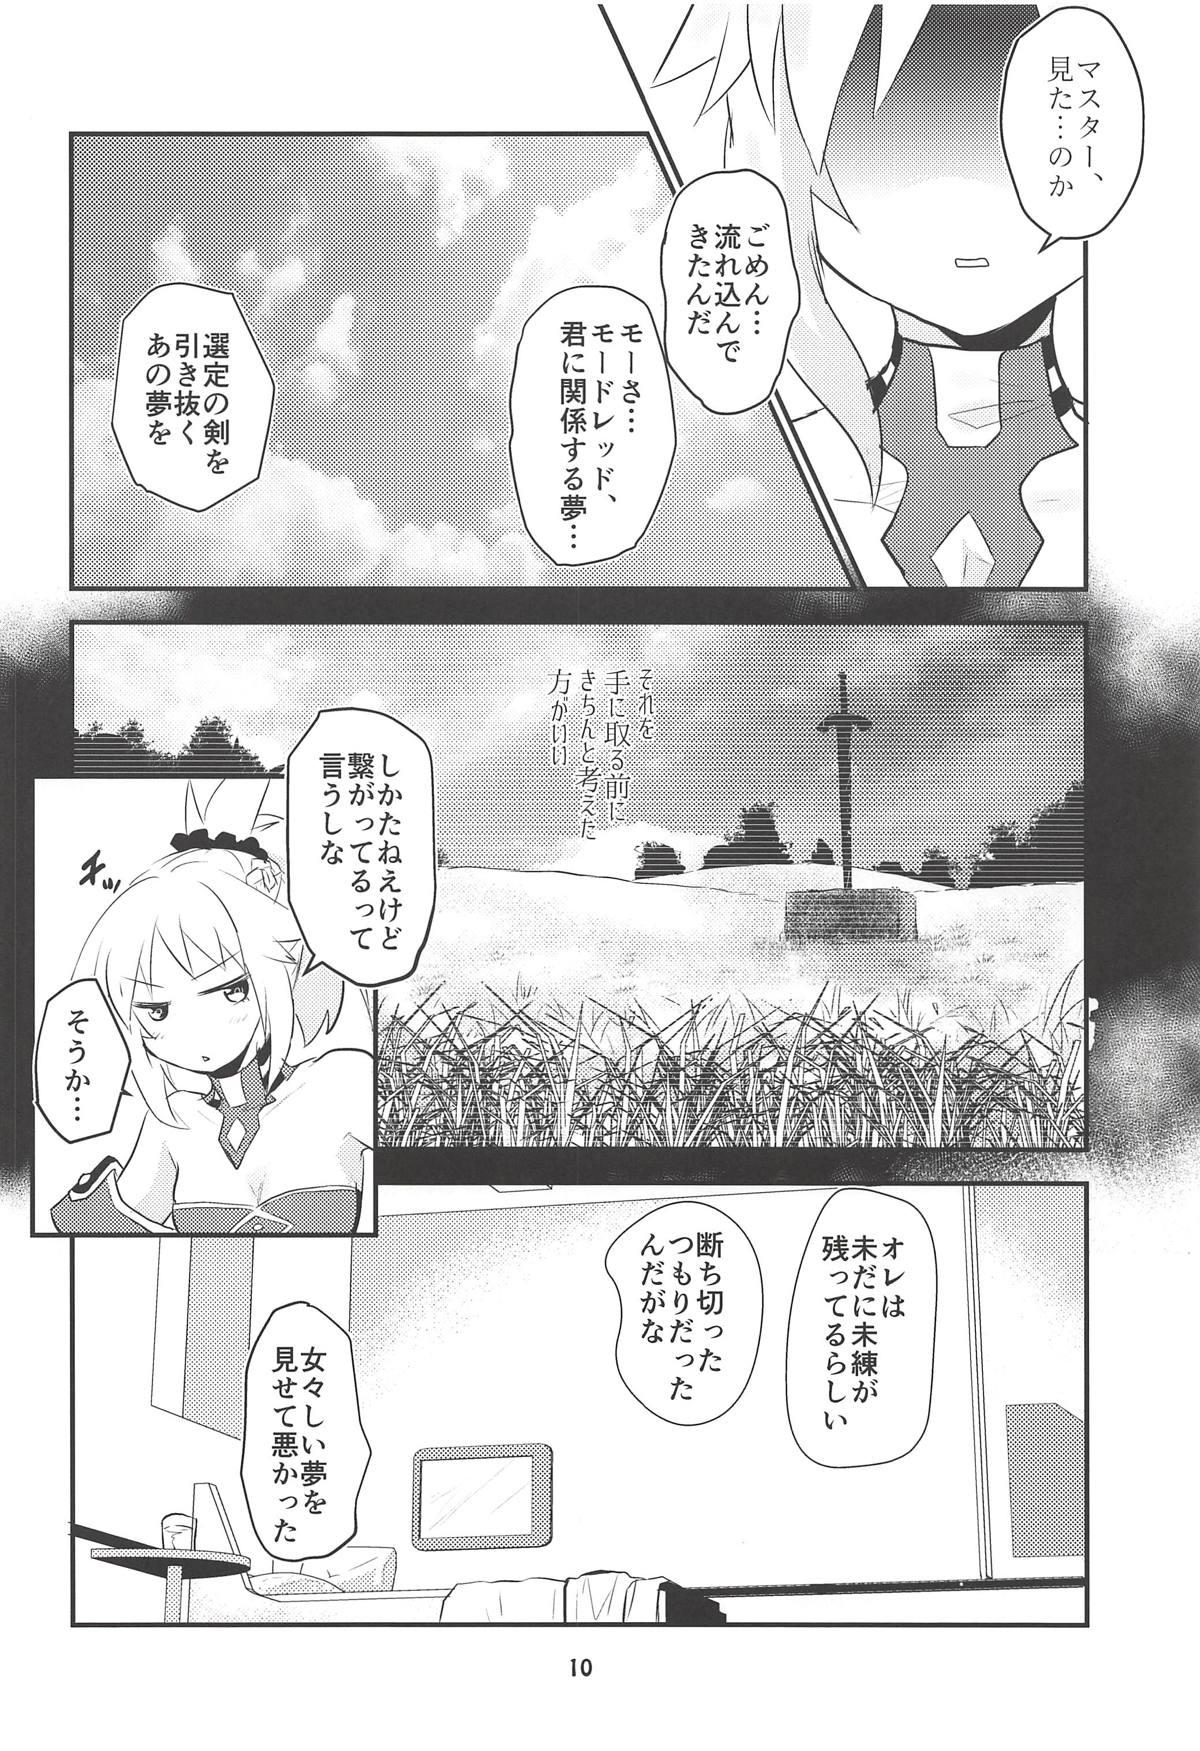 Free Amateur Dreaming - Fate grand order Transgender - Page 9